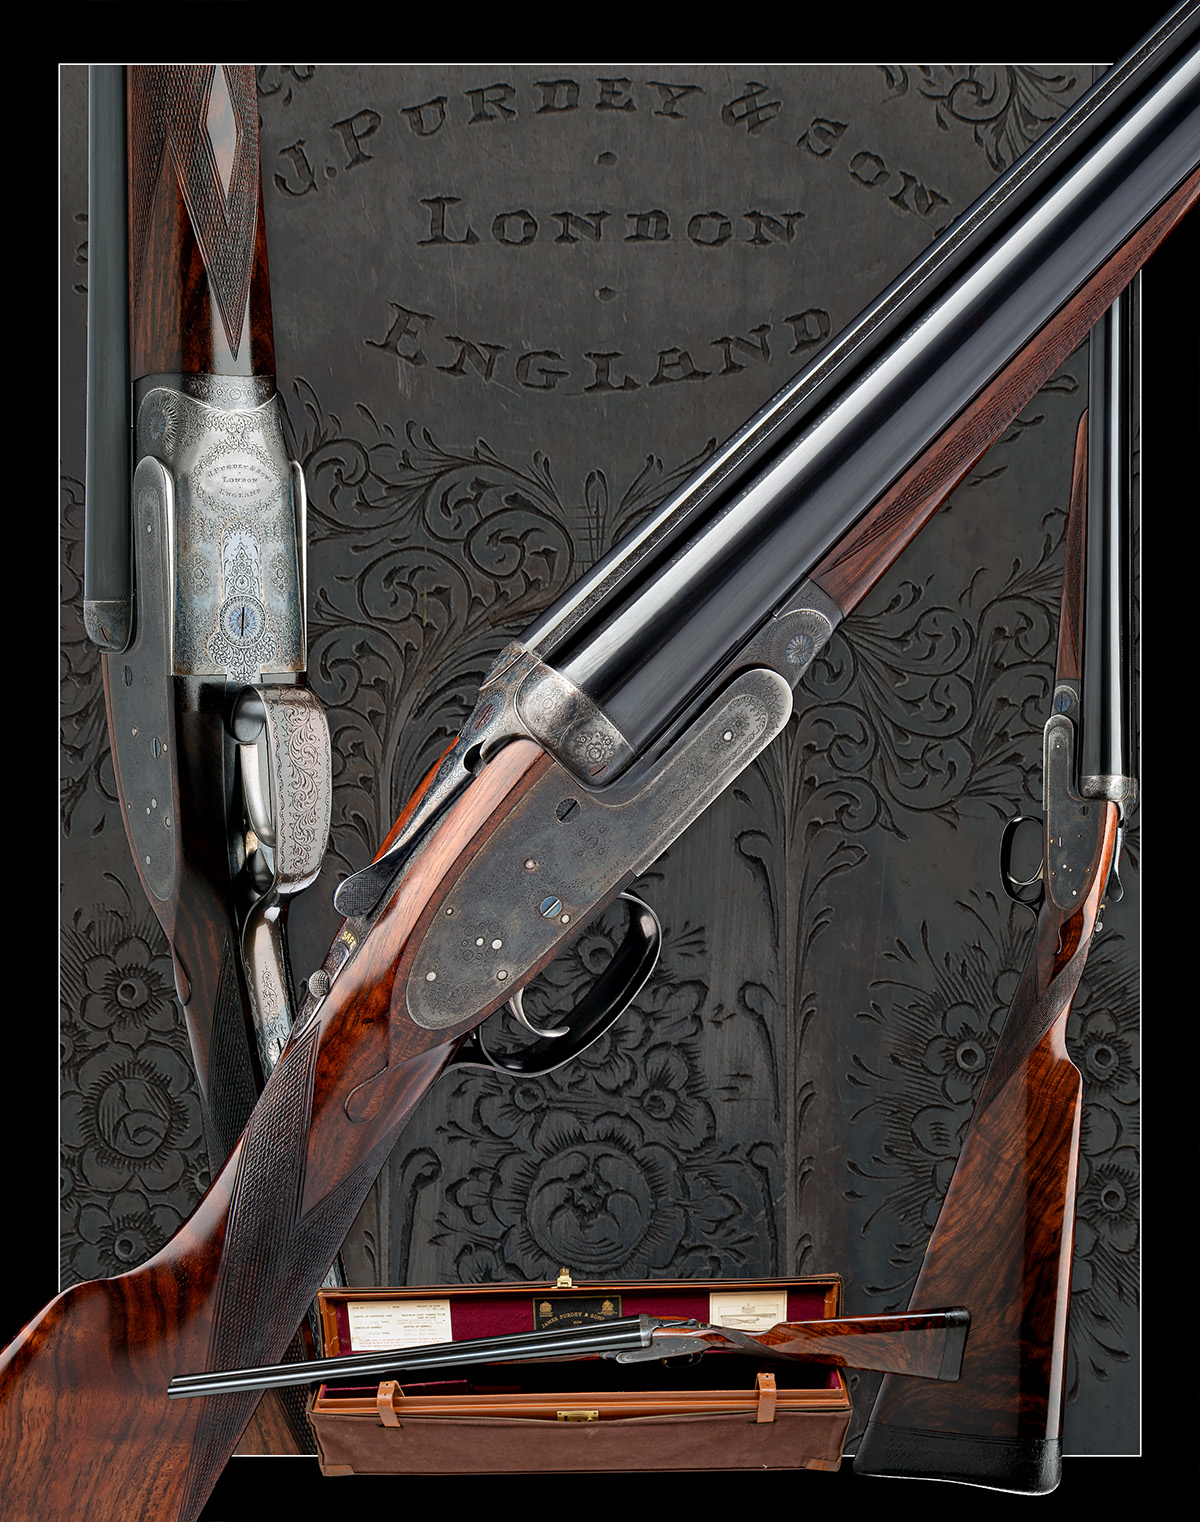 J. PURDEY & SONS A LIGHTLY-USED 12-BORE SINGLE-TRIGGER SELF-OPENING SIDELOCK EJECTOR, serial no. - Image 11 of 11